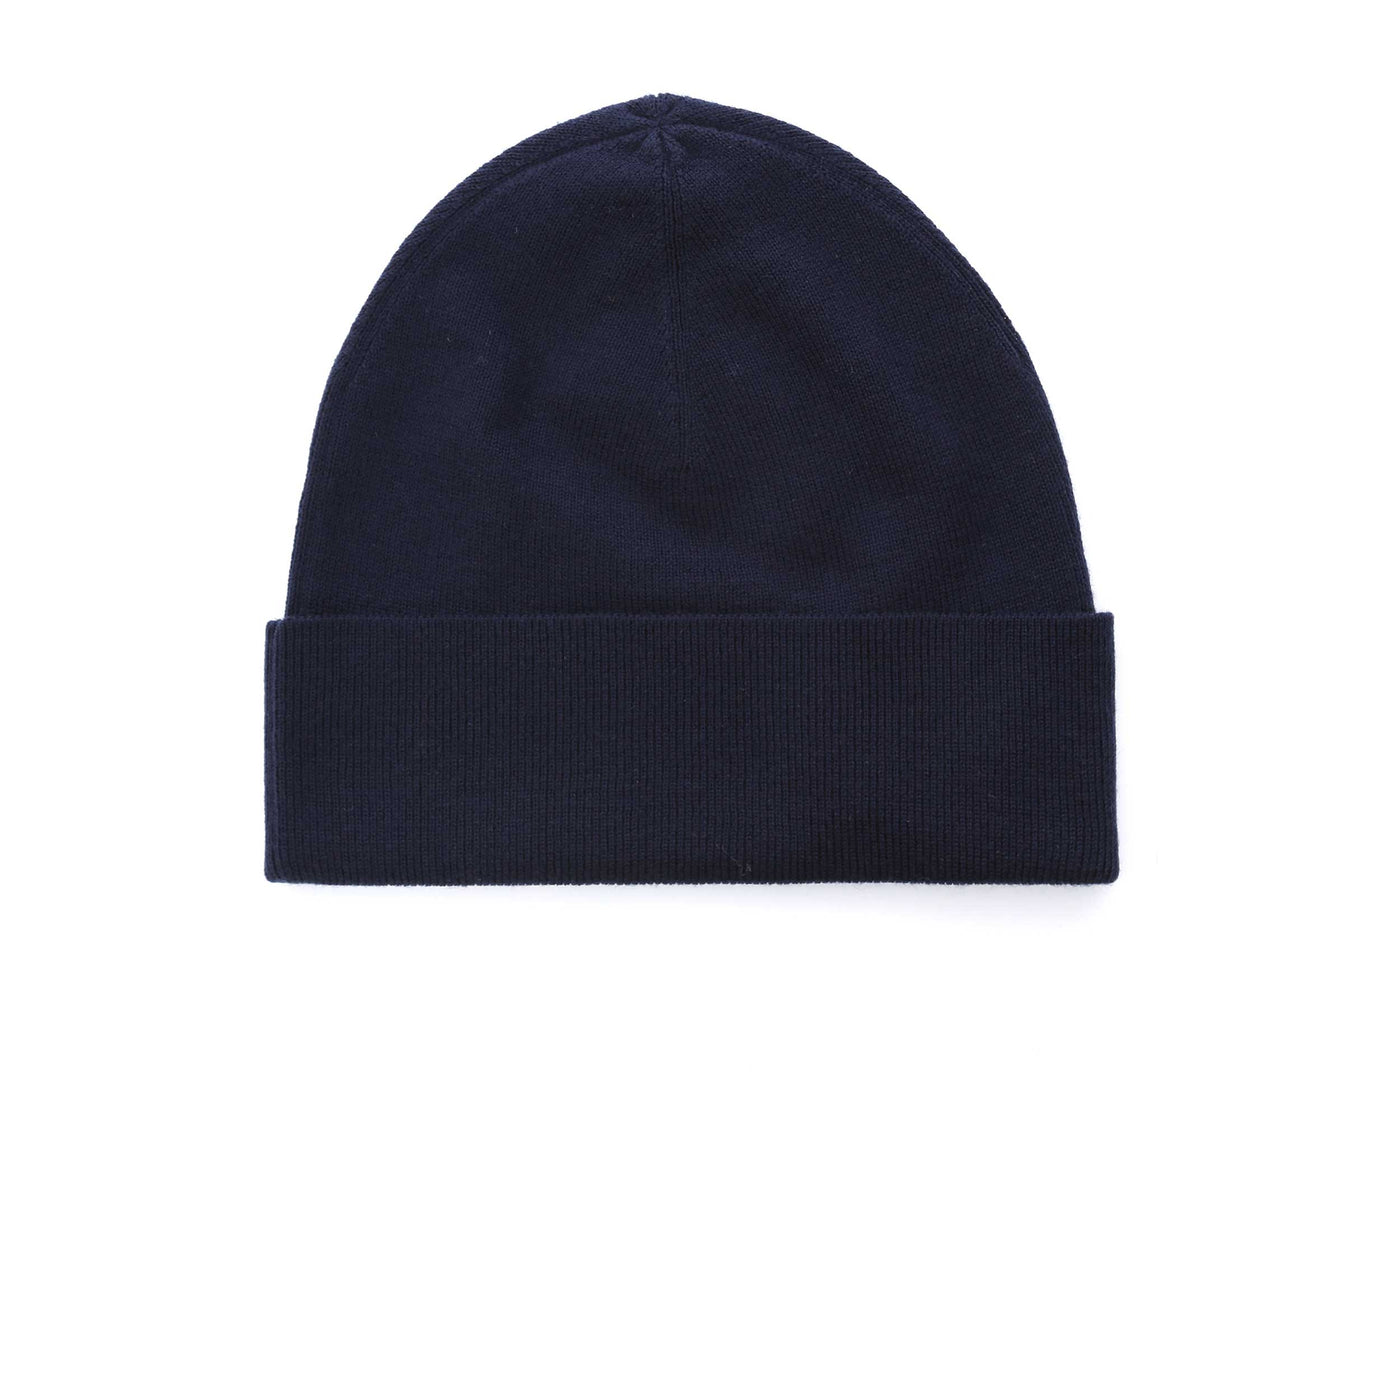 Paul Smith Artist End Beanie Hat in Navy Back